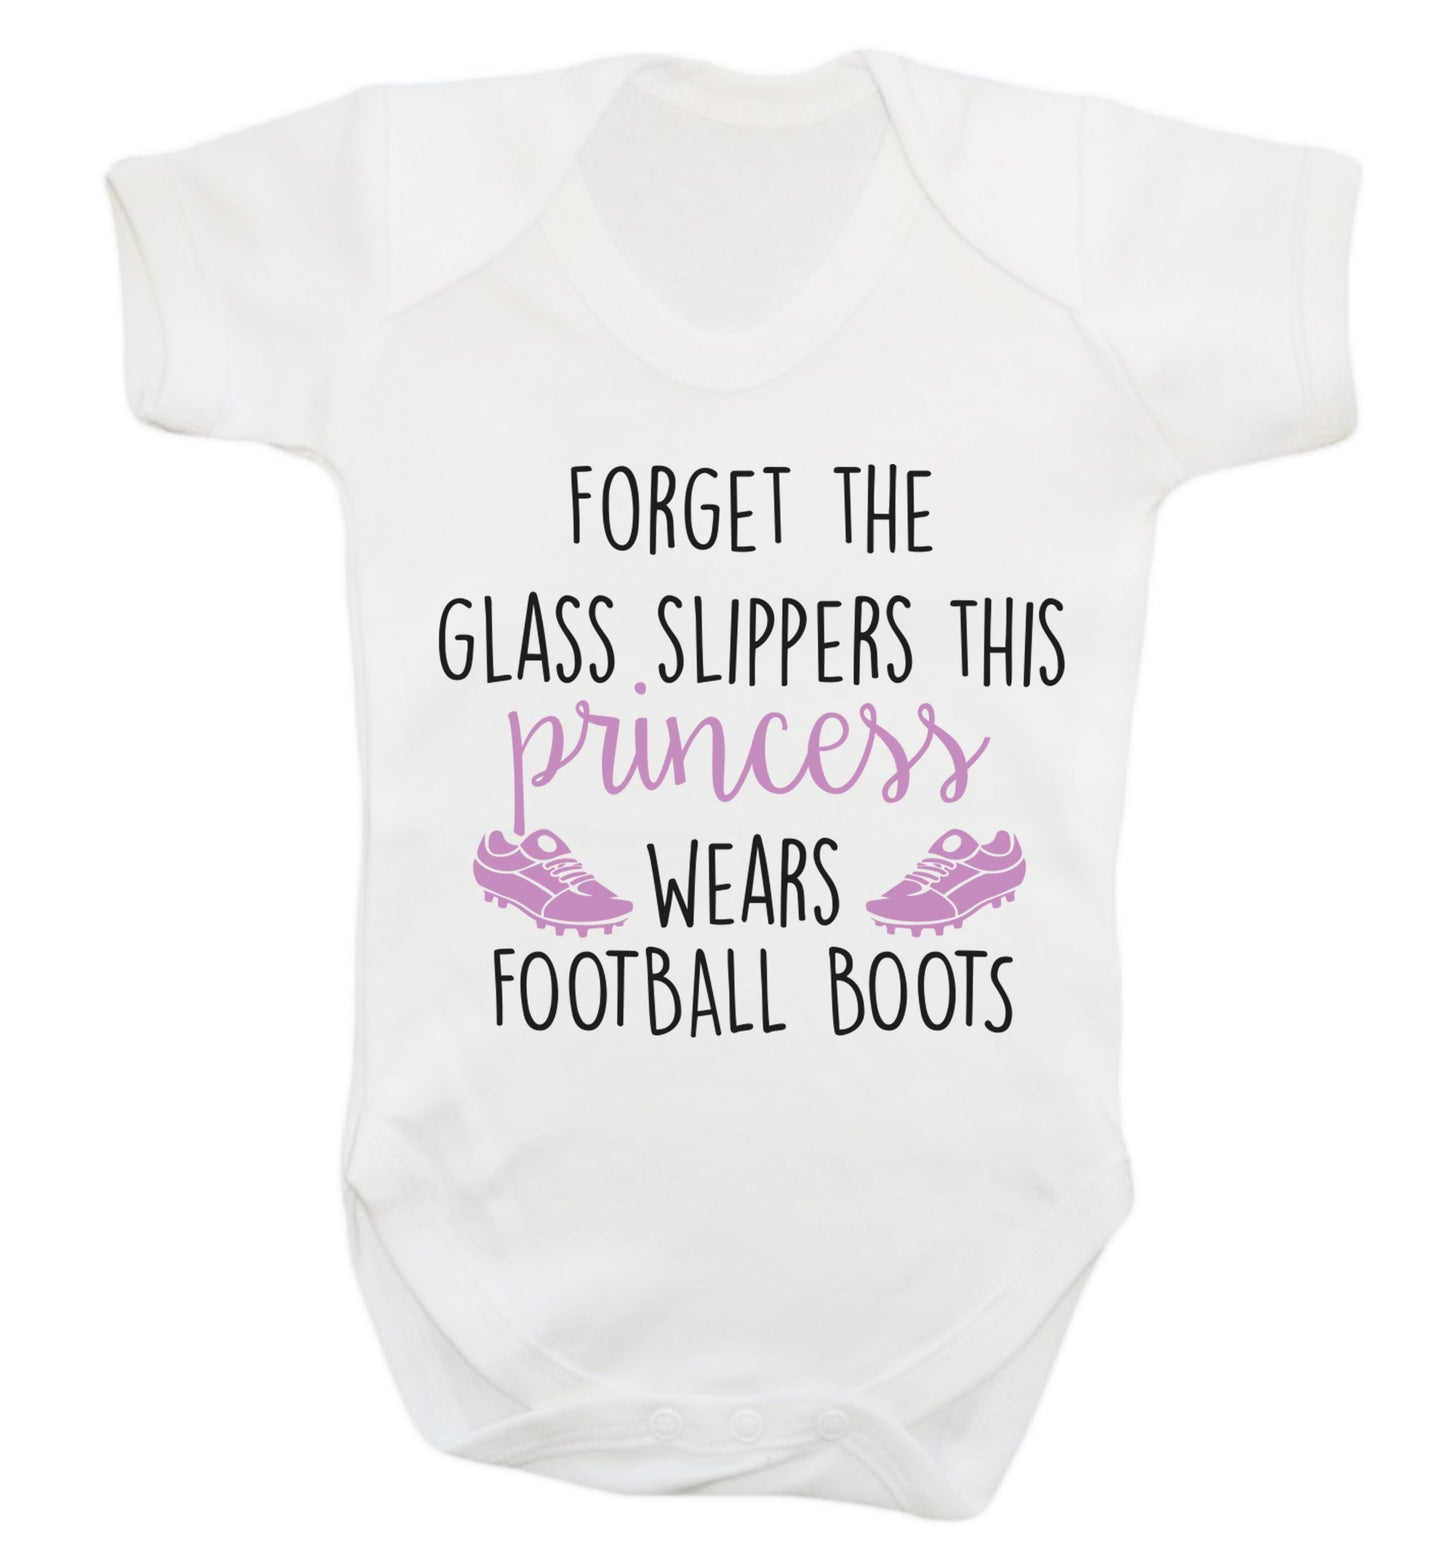 Forget the glass slippers this princess wears football boots Baby Vest white 18-24 months